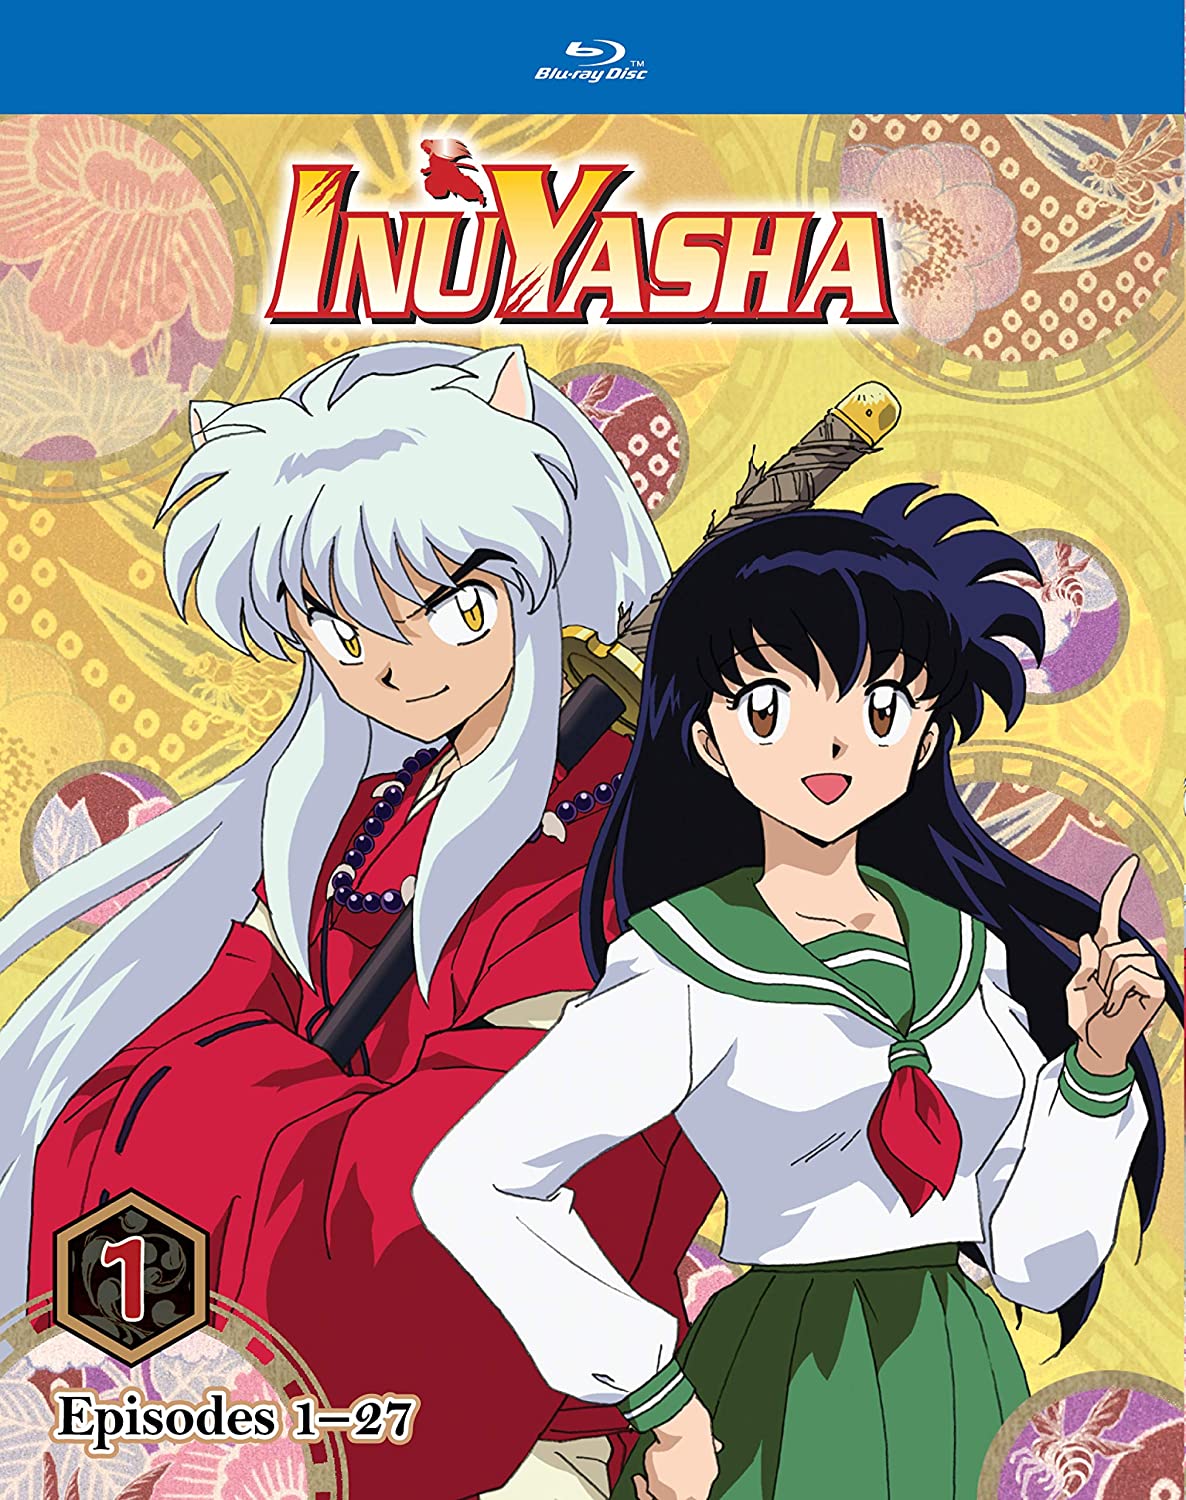 Inuyasha Comes to Blu-ray for the First Time on July 14!